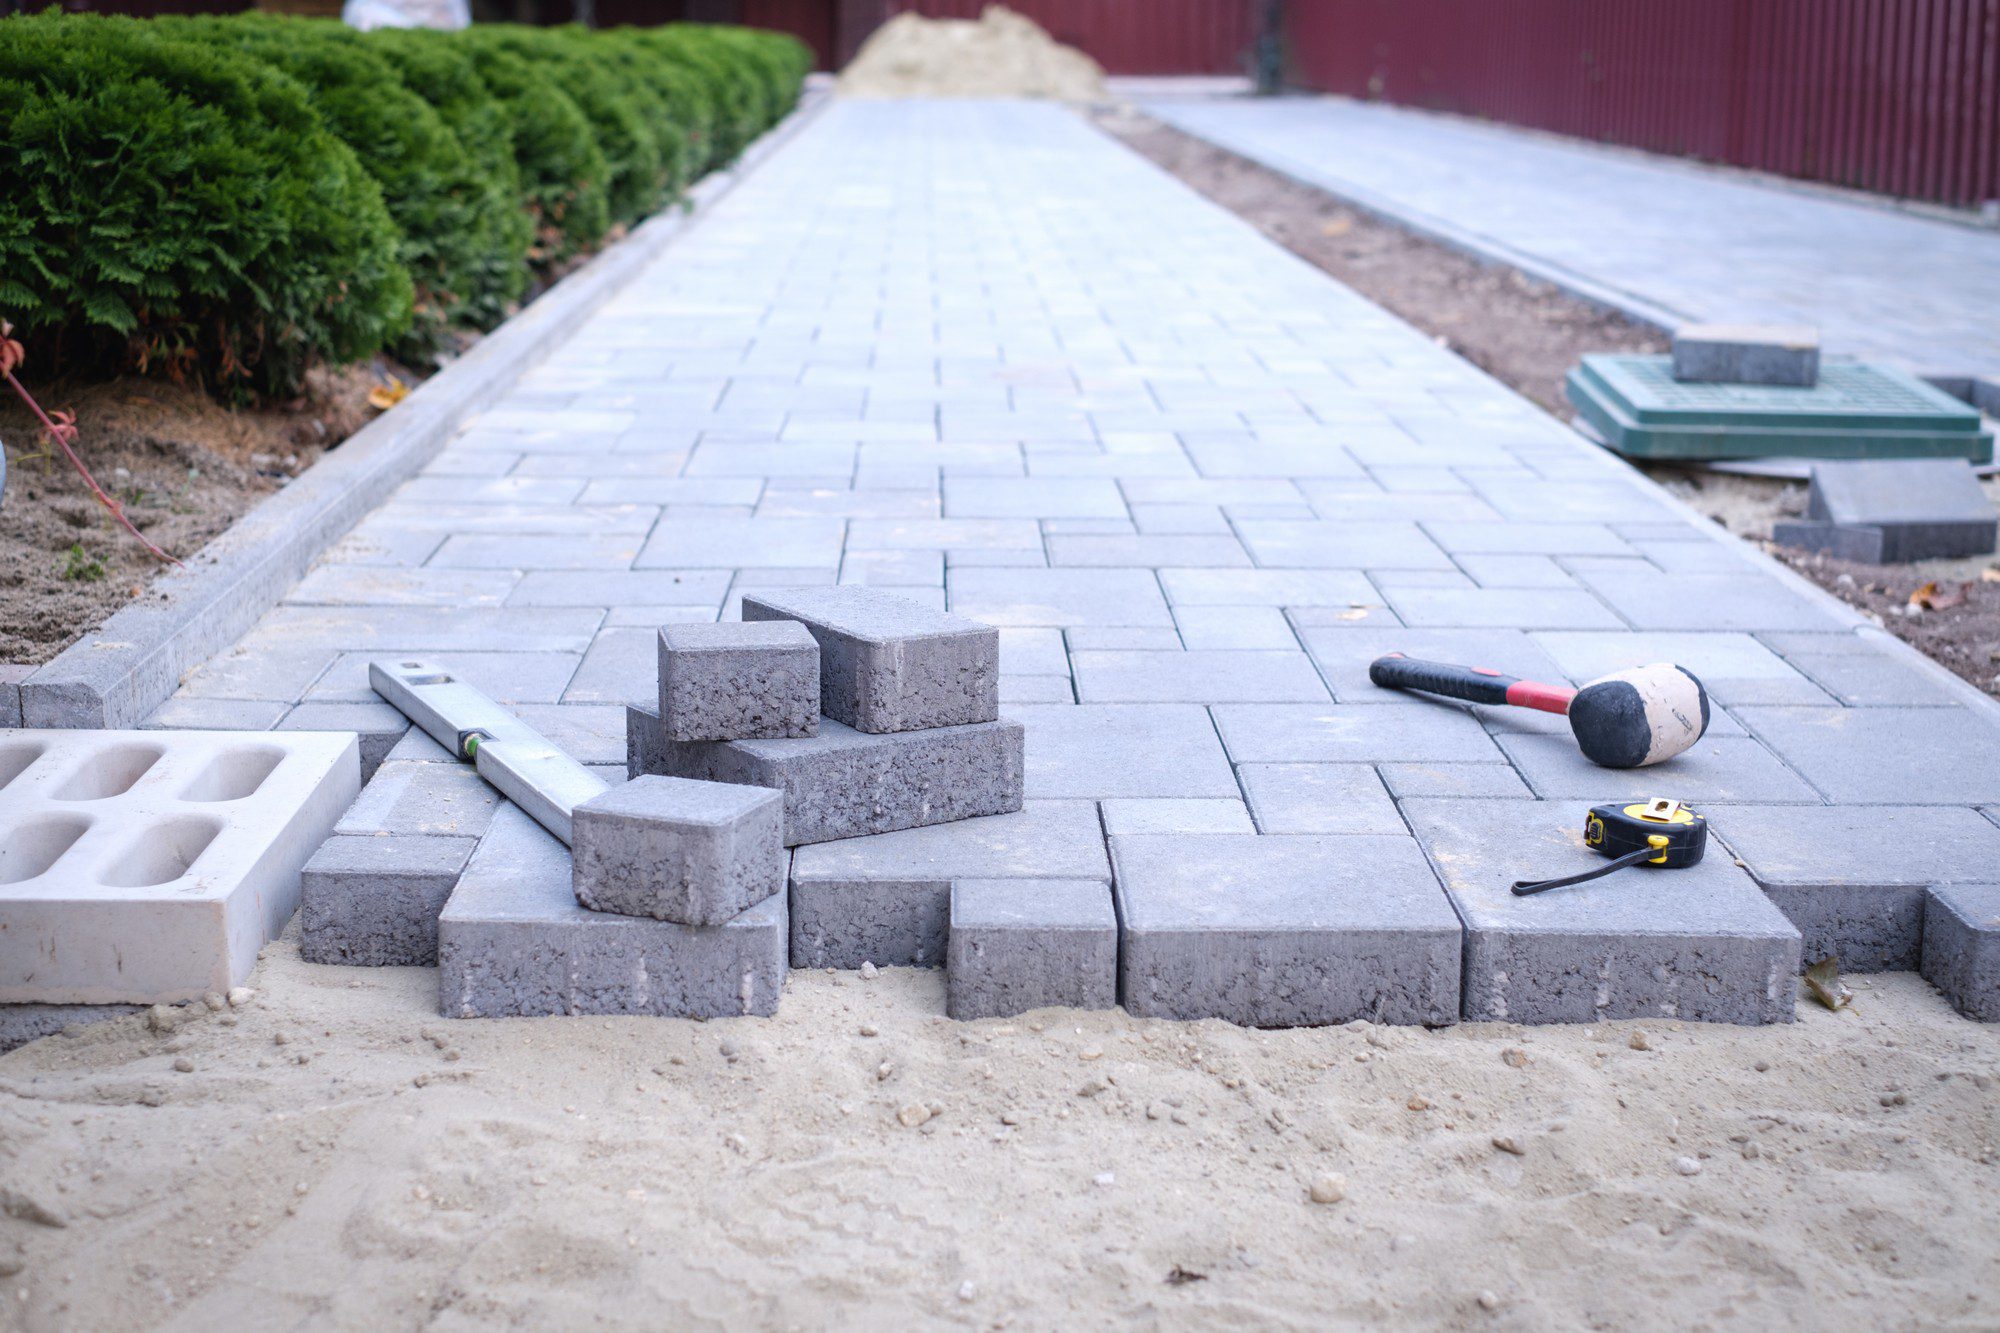 This image shows a work in progress of laying paving stones to create a pathway or patio. The individual gray paving stones are neatly arranged on the ground, forming a pattern on an area of compacted sand. To the side, some stones have been stacked up, likely in preparation to be placed. The scene includes a few tools commonly used in this type of work: a rubber mallet, presumably used to gently tap the pavers into place; a spirit level for making sure the pavers are even and level; and a tape measure for precise measurements. In the background, you can see a lined garden bed with shrubs and a pile of sand, indicating that the construction work is ongoing. A metal or plastic border appears to edge the pathway, providing a clean line and helping to hold the pavers in place. The environment suggests residential landscaping or possibly public walkway renovation.